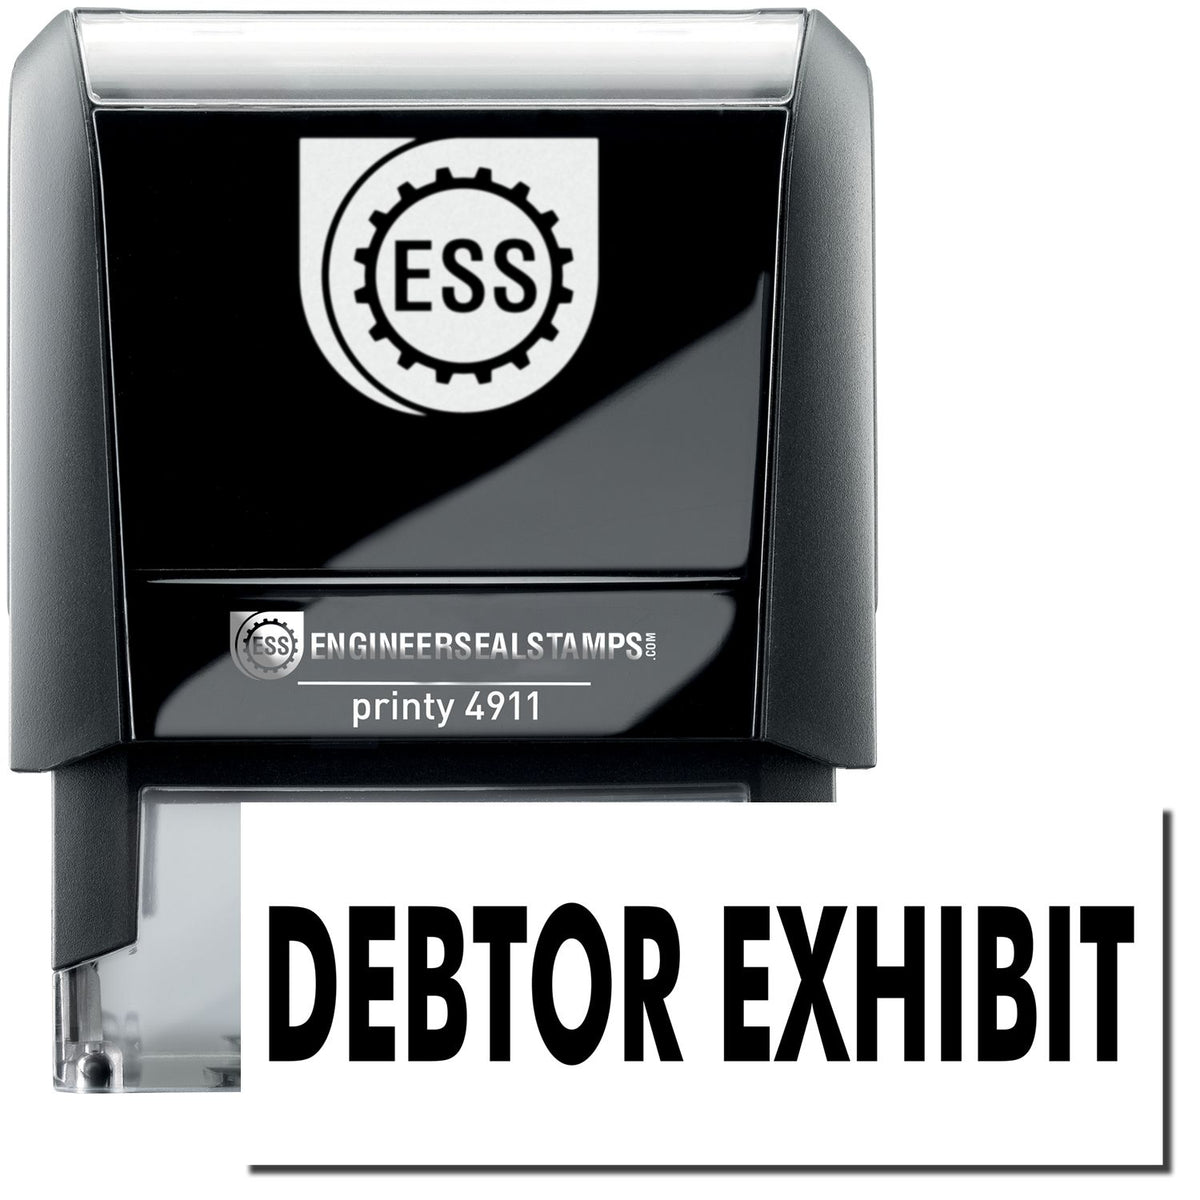 A self-inking stamp with a stamped image showing how the text &quot;DEBTOR EXHIBIT&quot; is displayed after stamping.